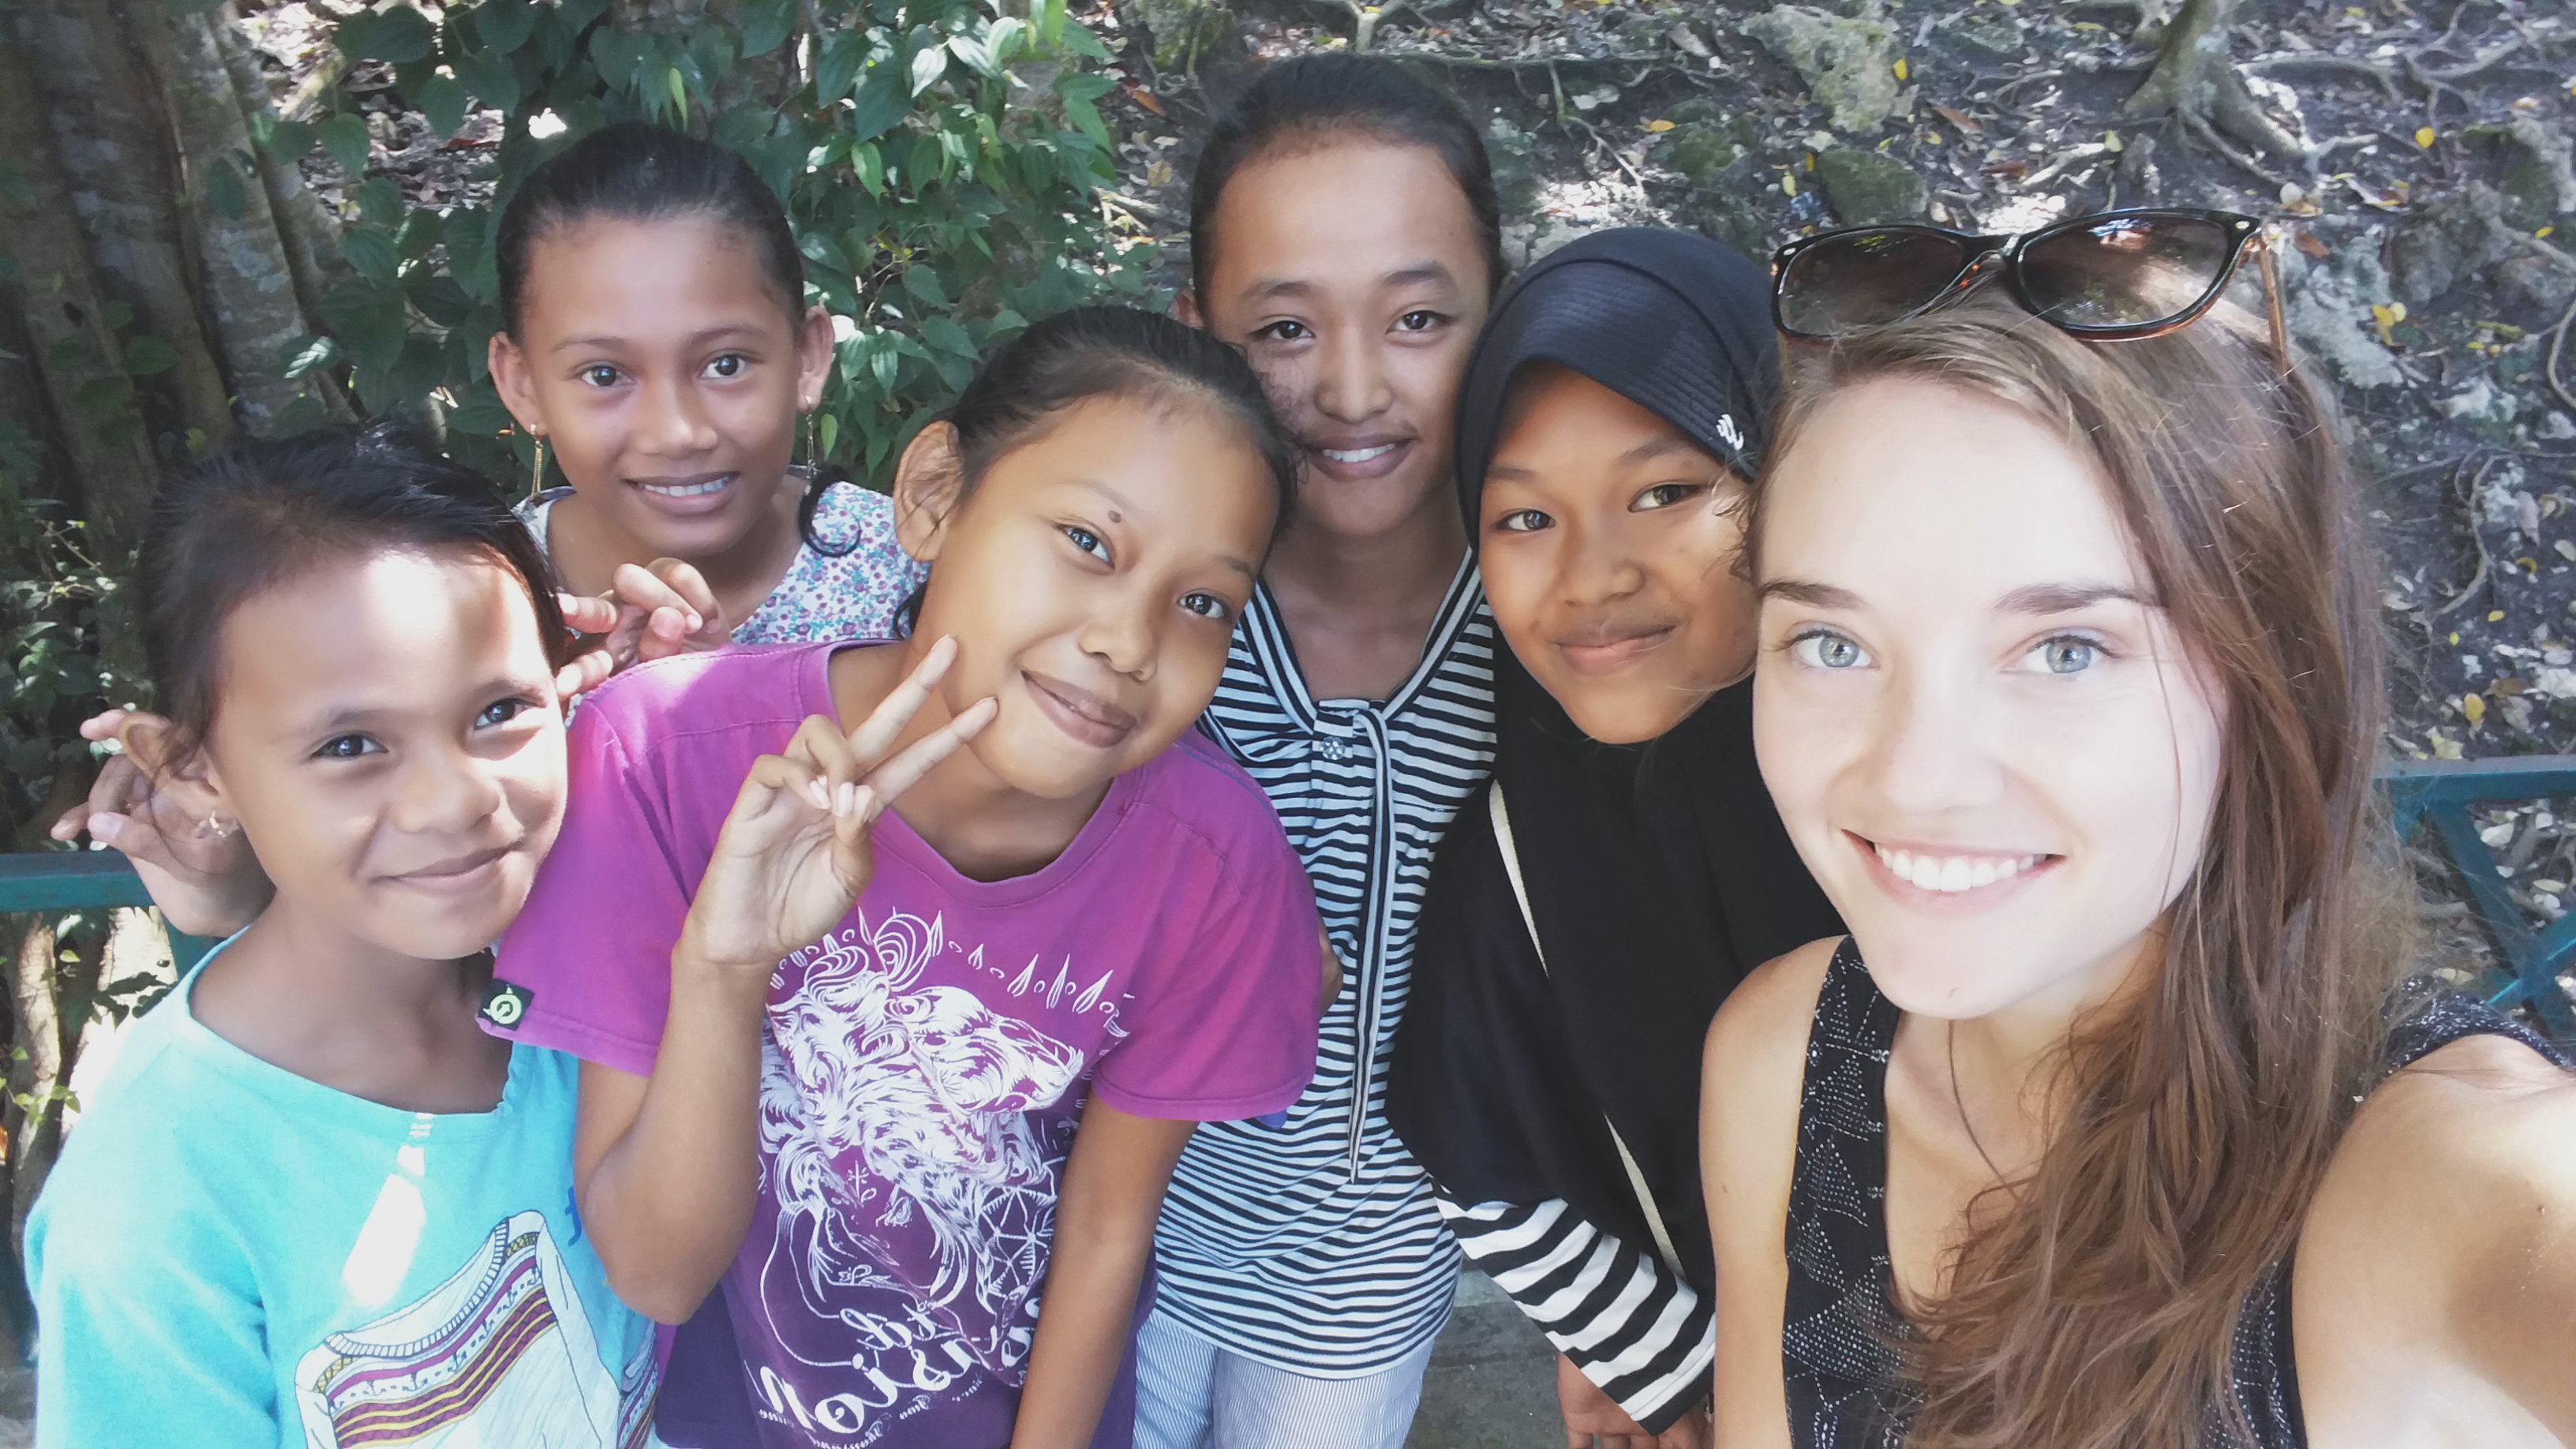 Indonesia, Ampana- local girls that asked to take a photo